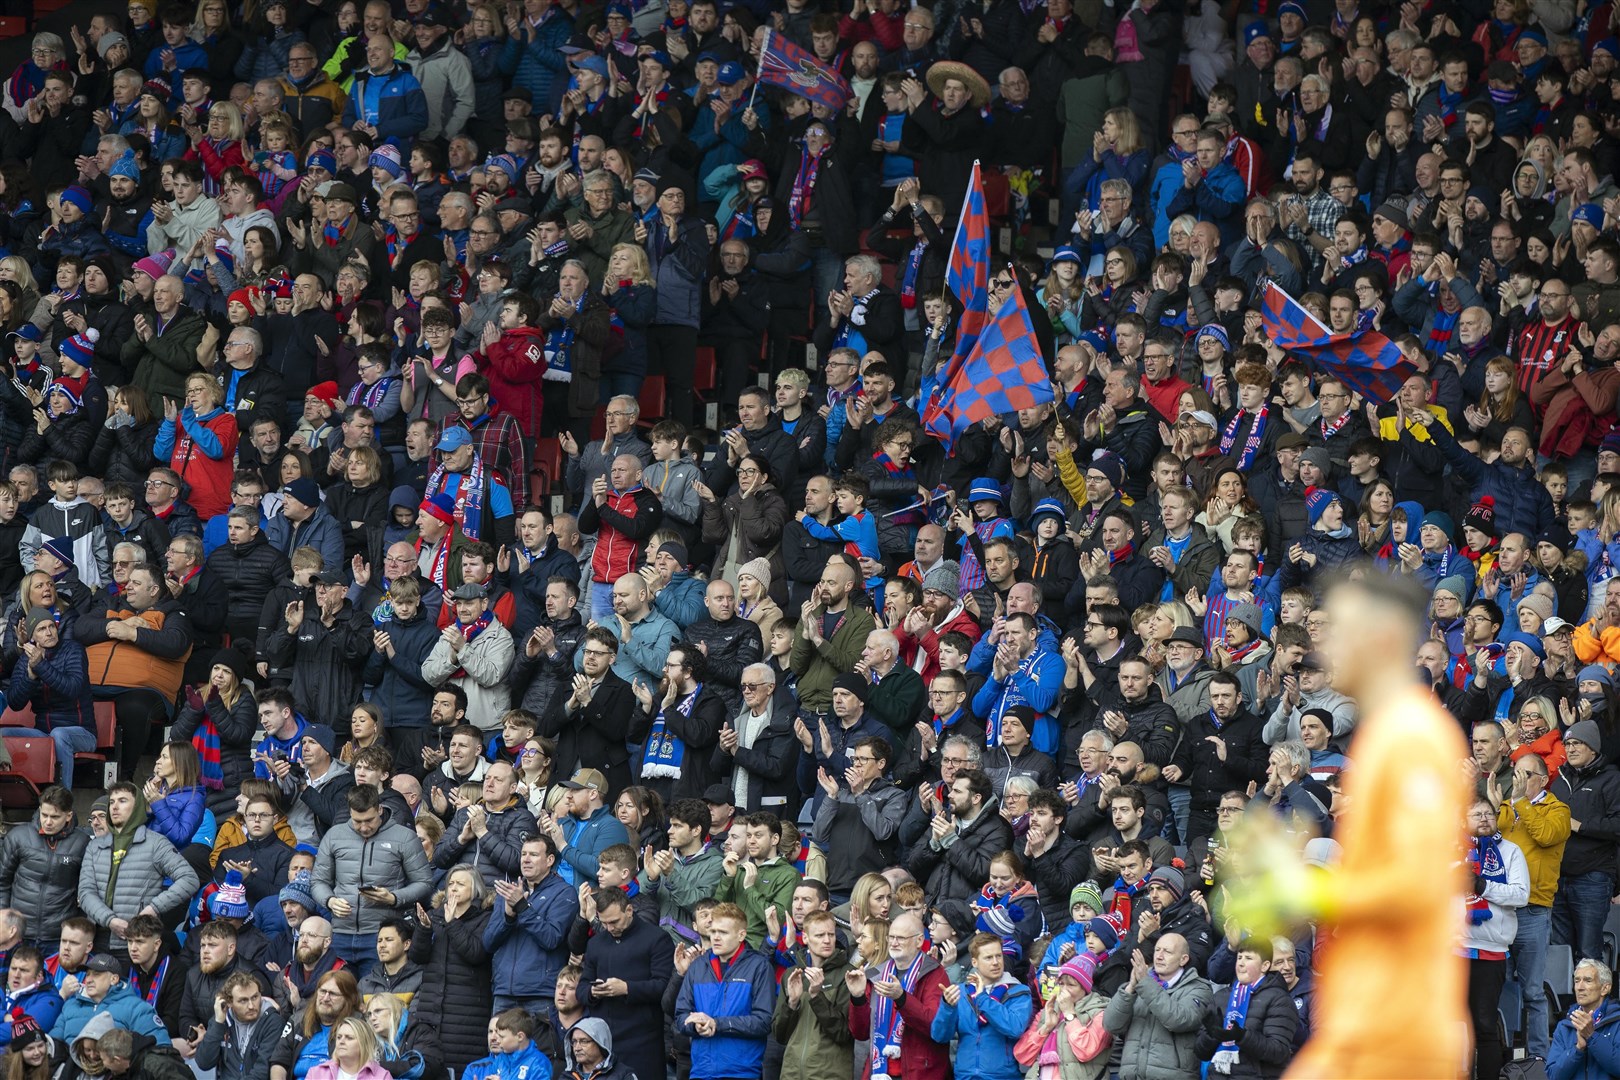 Scottish Cup semi-final finished Falkirk (0) v Inverness CT (3) but many fans may not be able to make the journey.